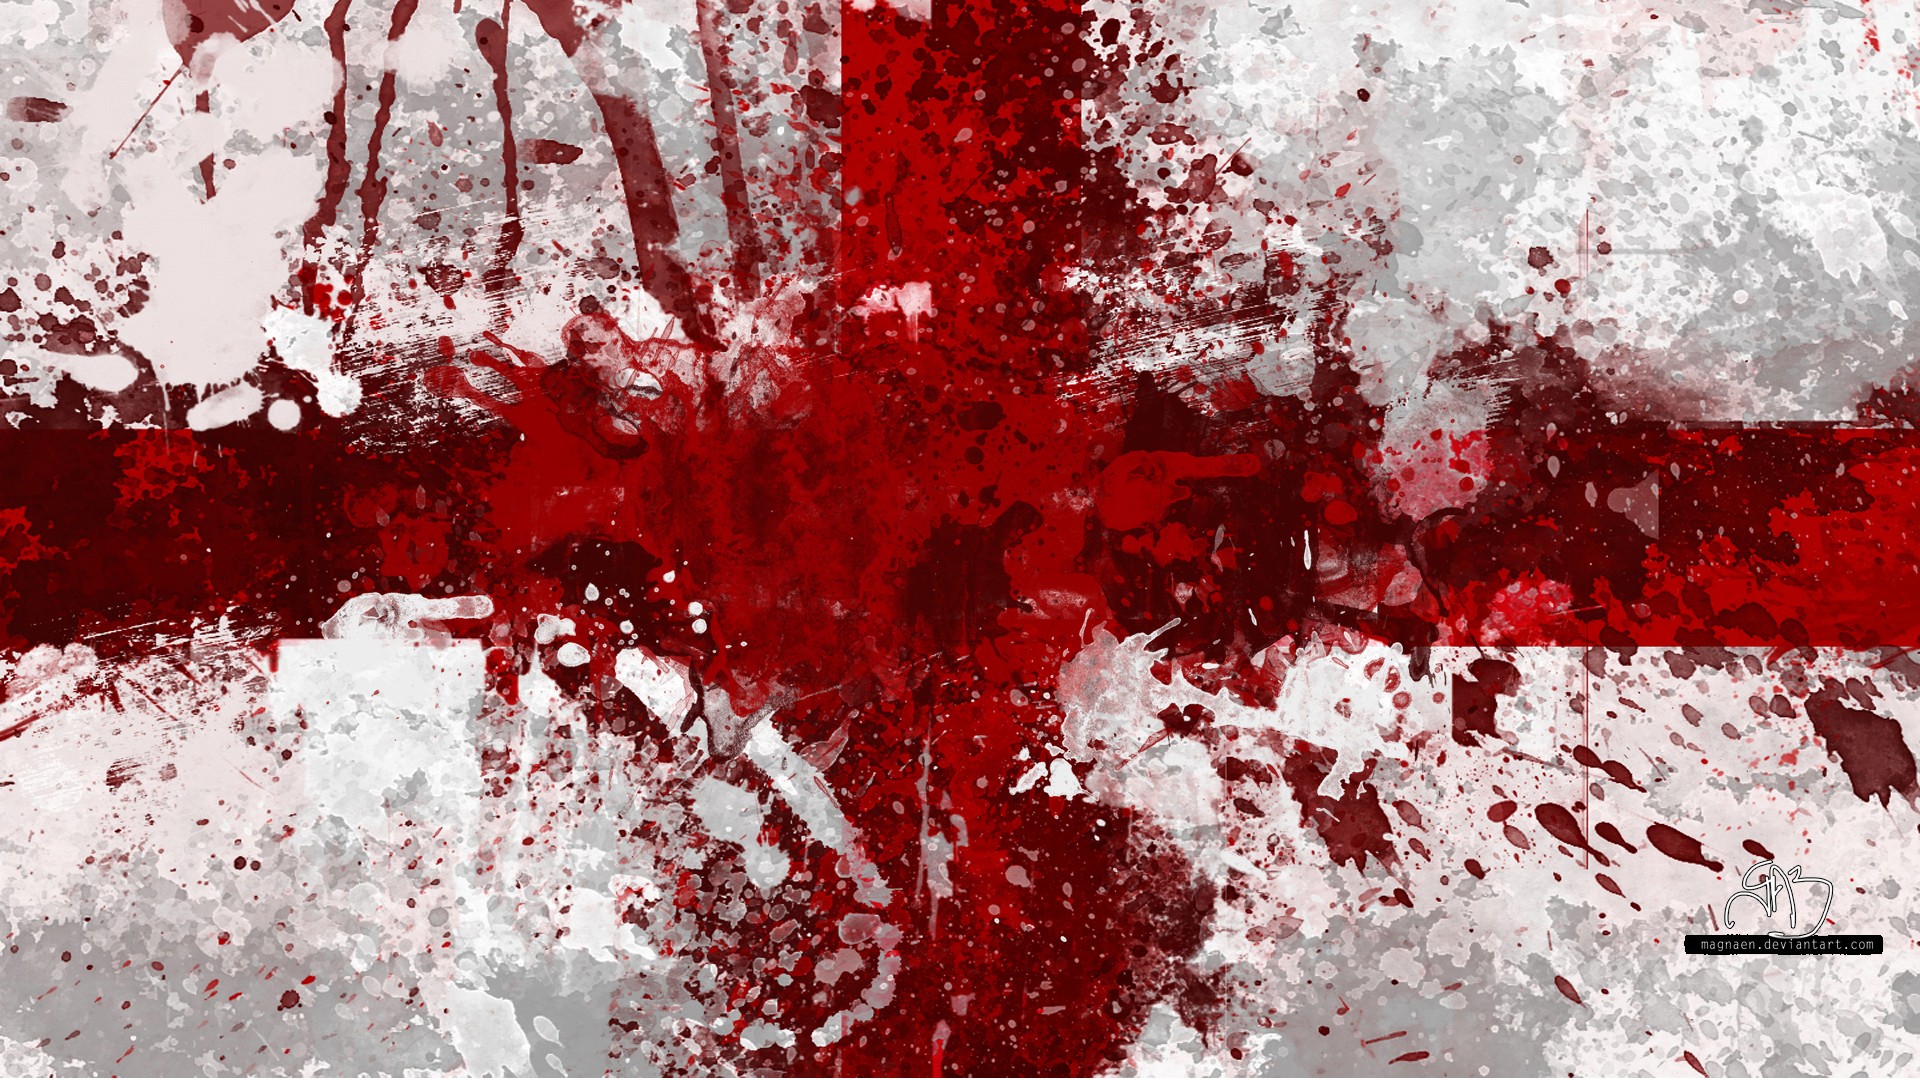 Bloody desktop wallpapers background picture, Cross sign with blood, flowing, droplet